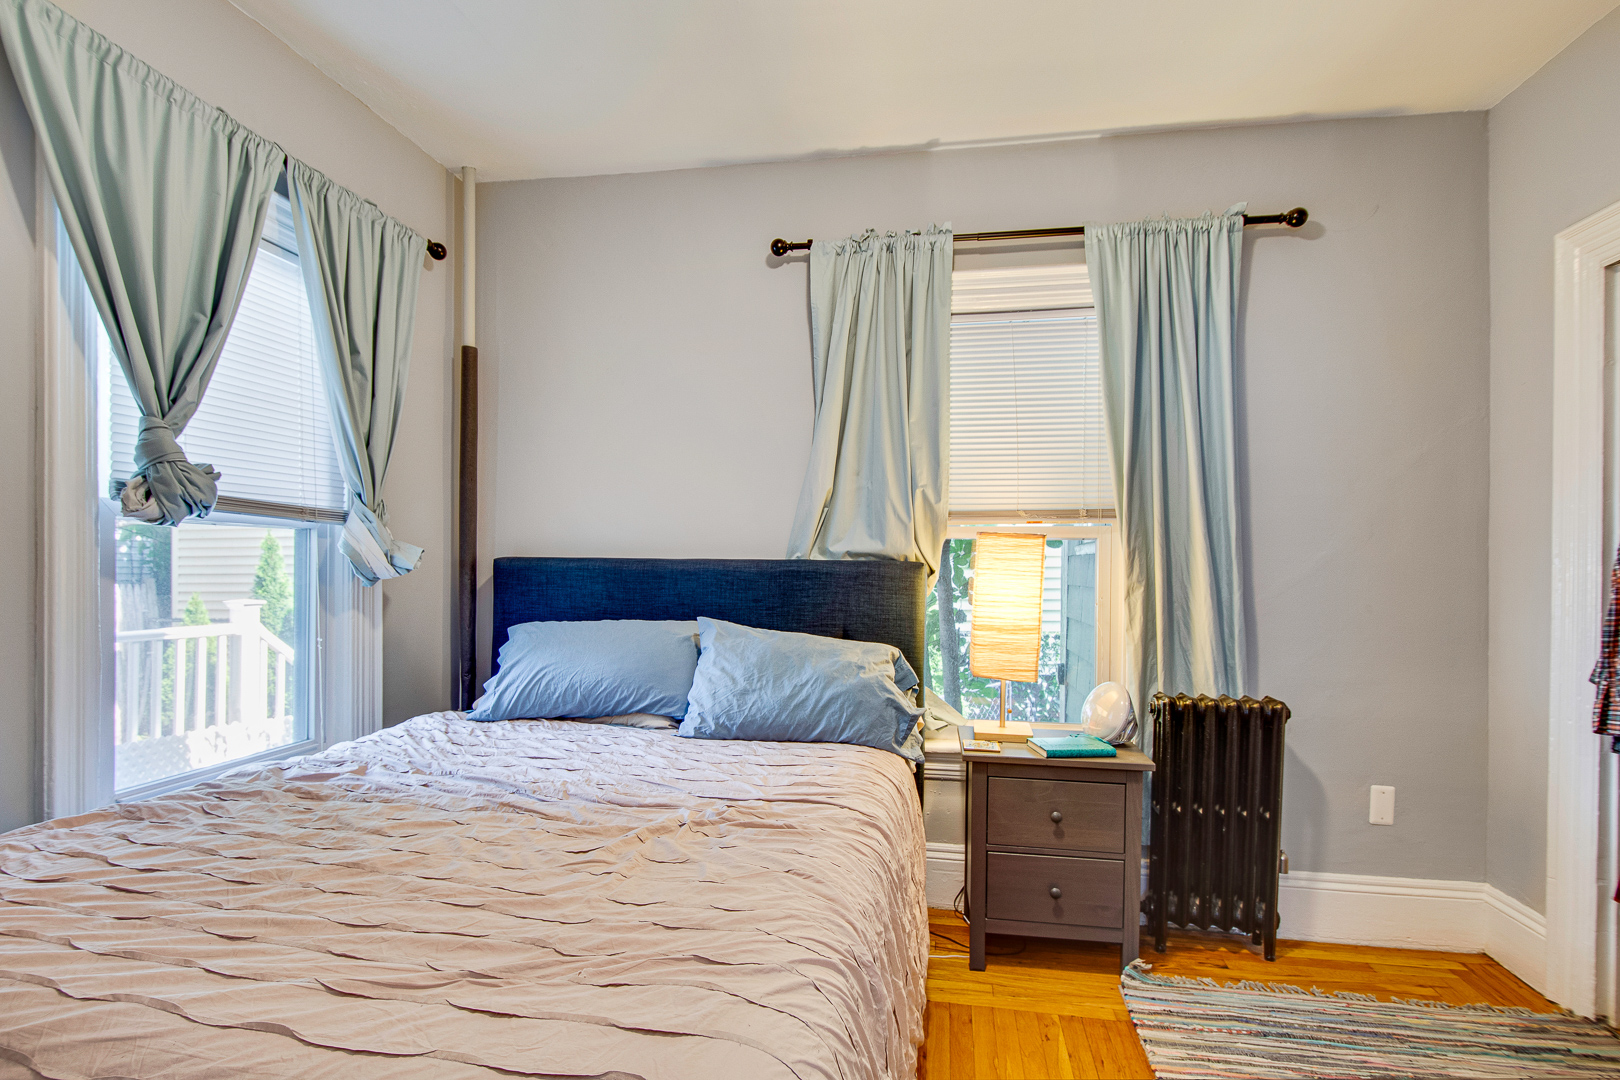 Thomas Adach - Somerville MA professional real estate photographer - 508-655-2225 Home Listing Photography